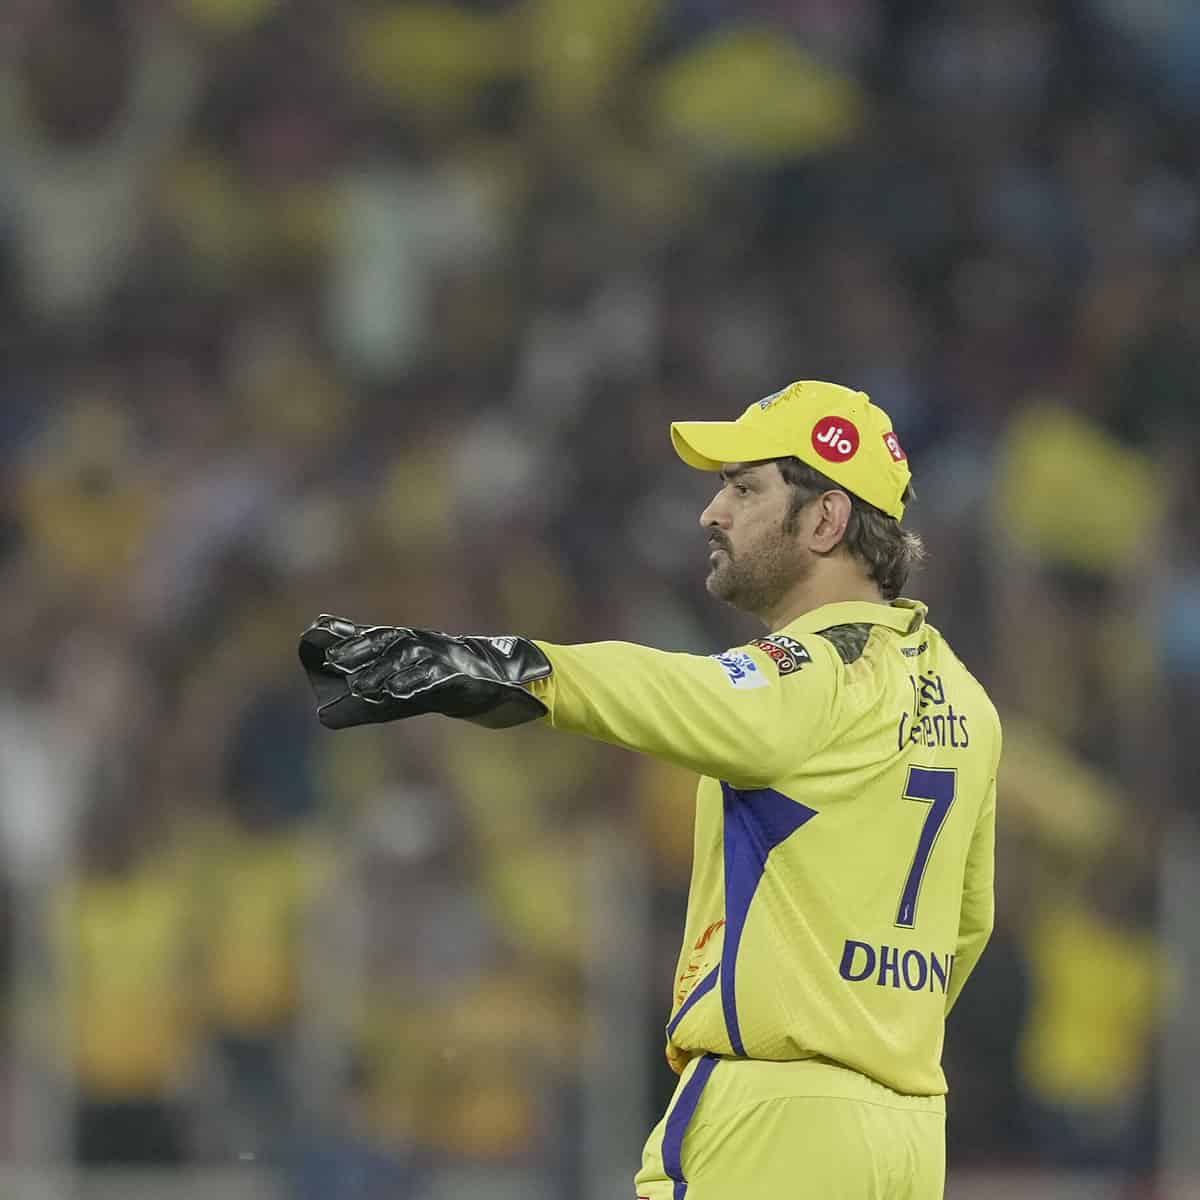 Post 5th IPL title, here's what MS Dhoni will 'gift' CSK fans